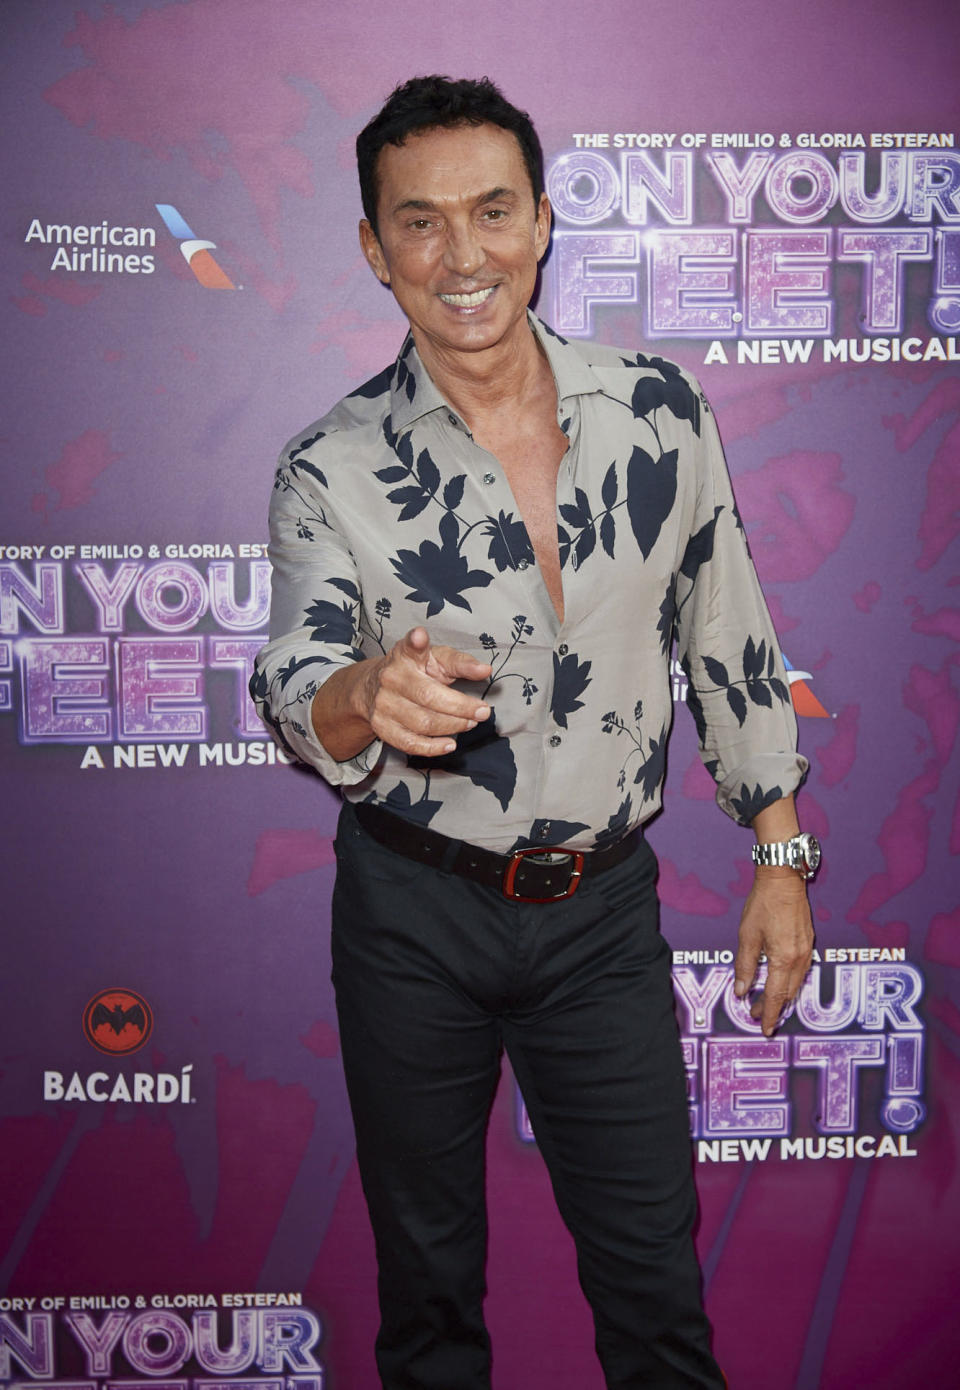 Photo by: zz/KGC-247/STAR MAX/IPx 2019 6/27/19 Bruno Tonioli at the press night for "On Your Feet: The Story of Emilio & Gloria Estefan" held at the London Coliseum, St. Martin's Lane, London, England, UK.